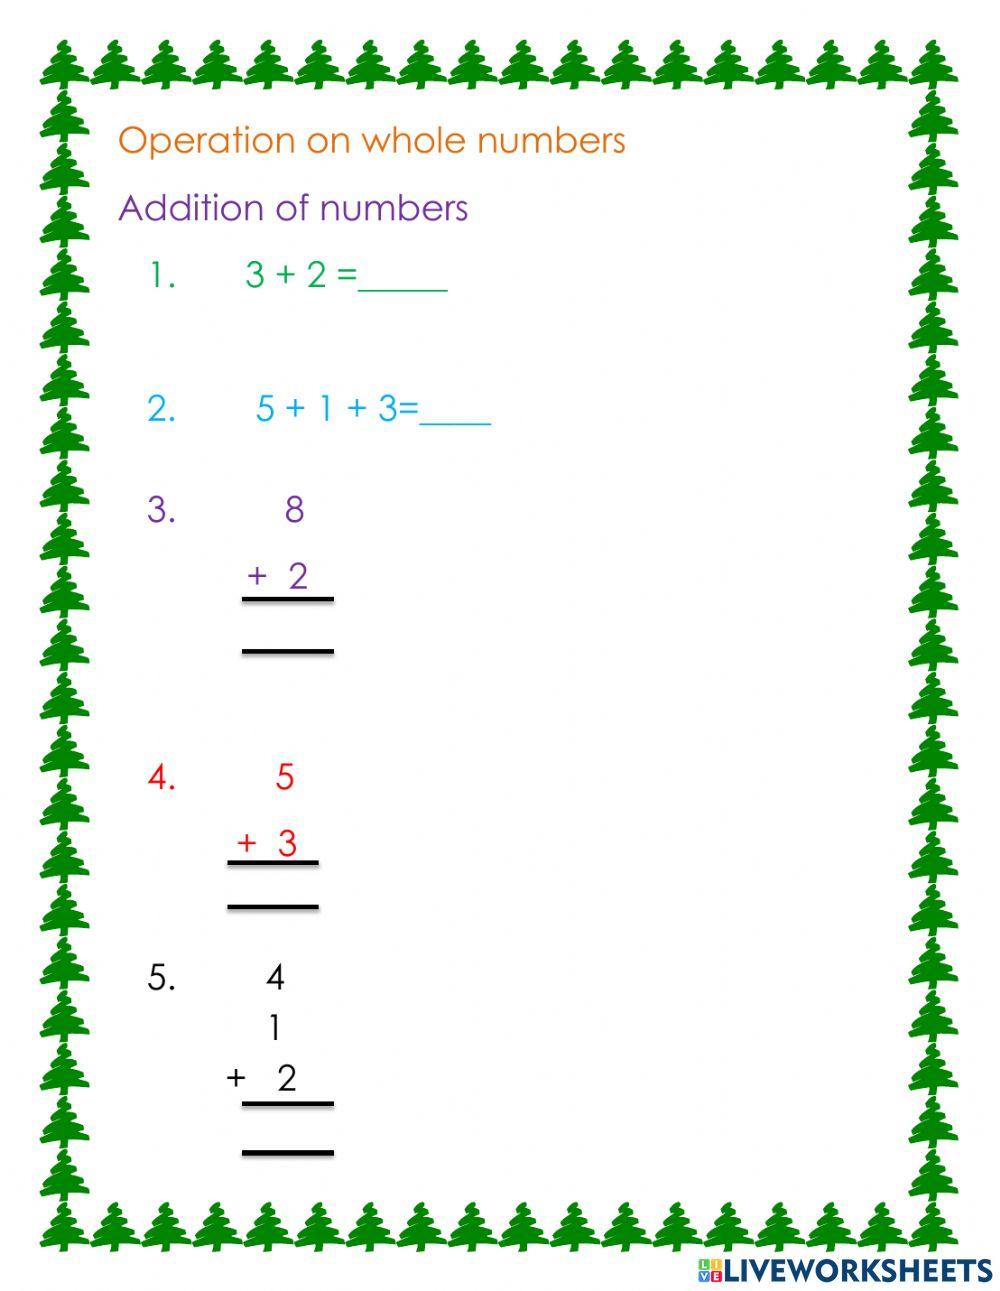 Operation on whole numbers